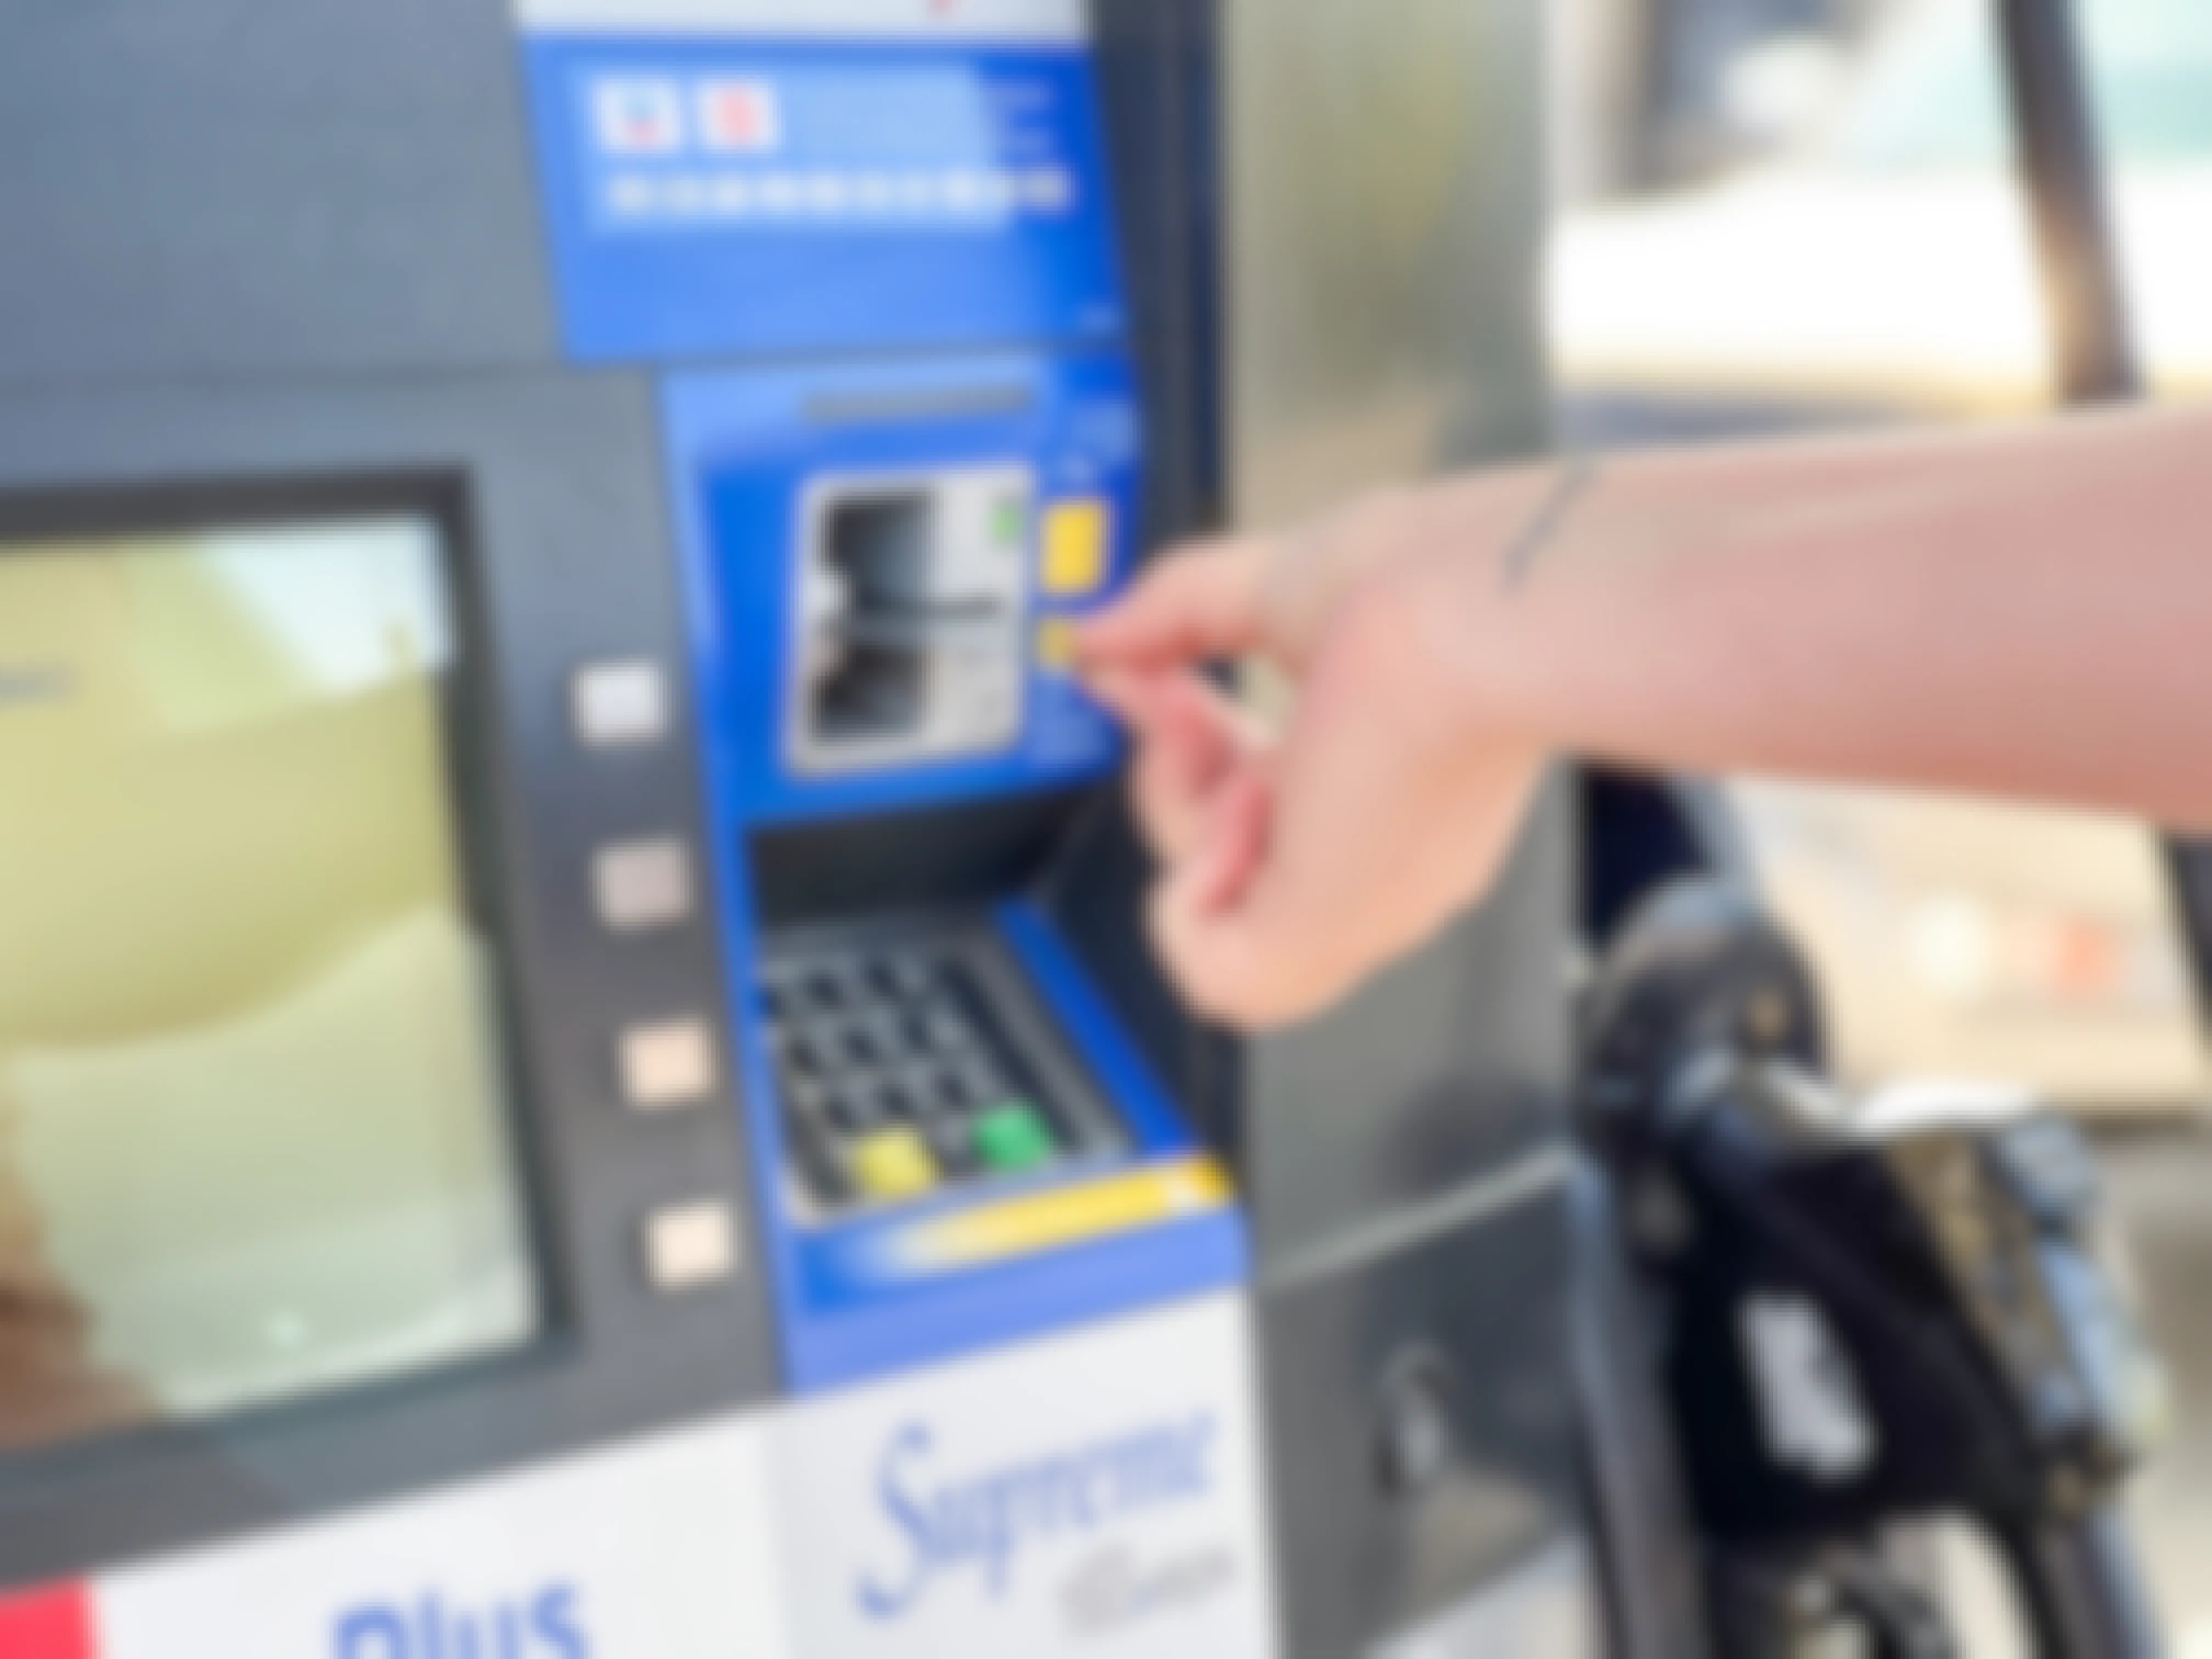 A person's hand putting their credit card into the card reader at a gas pump.